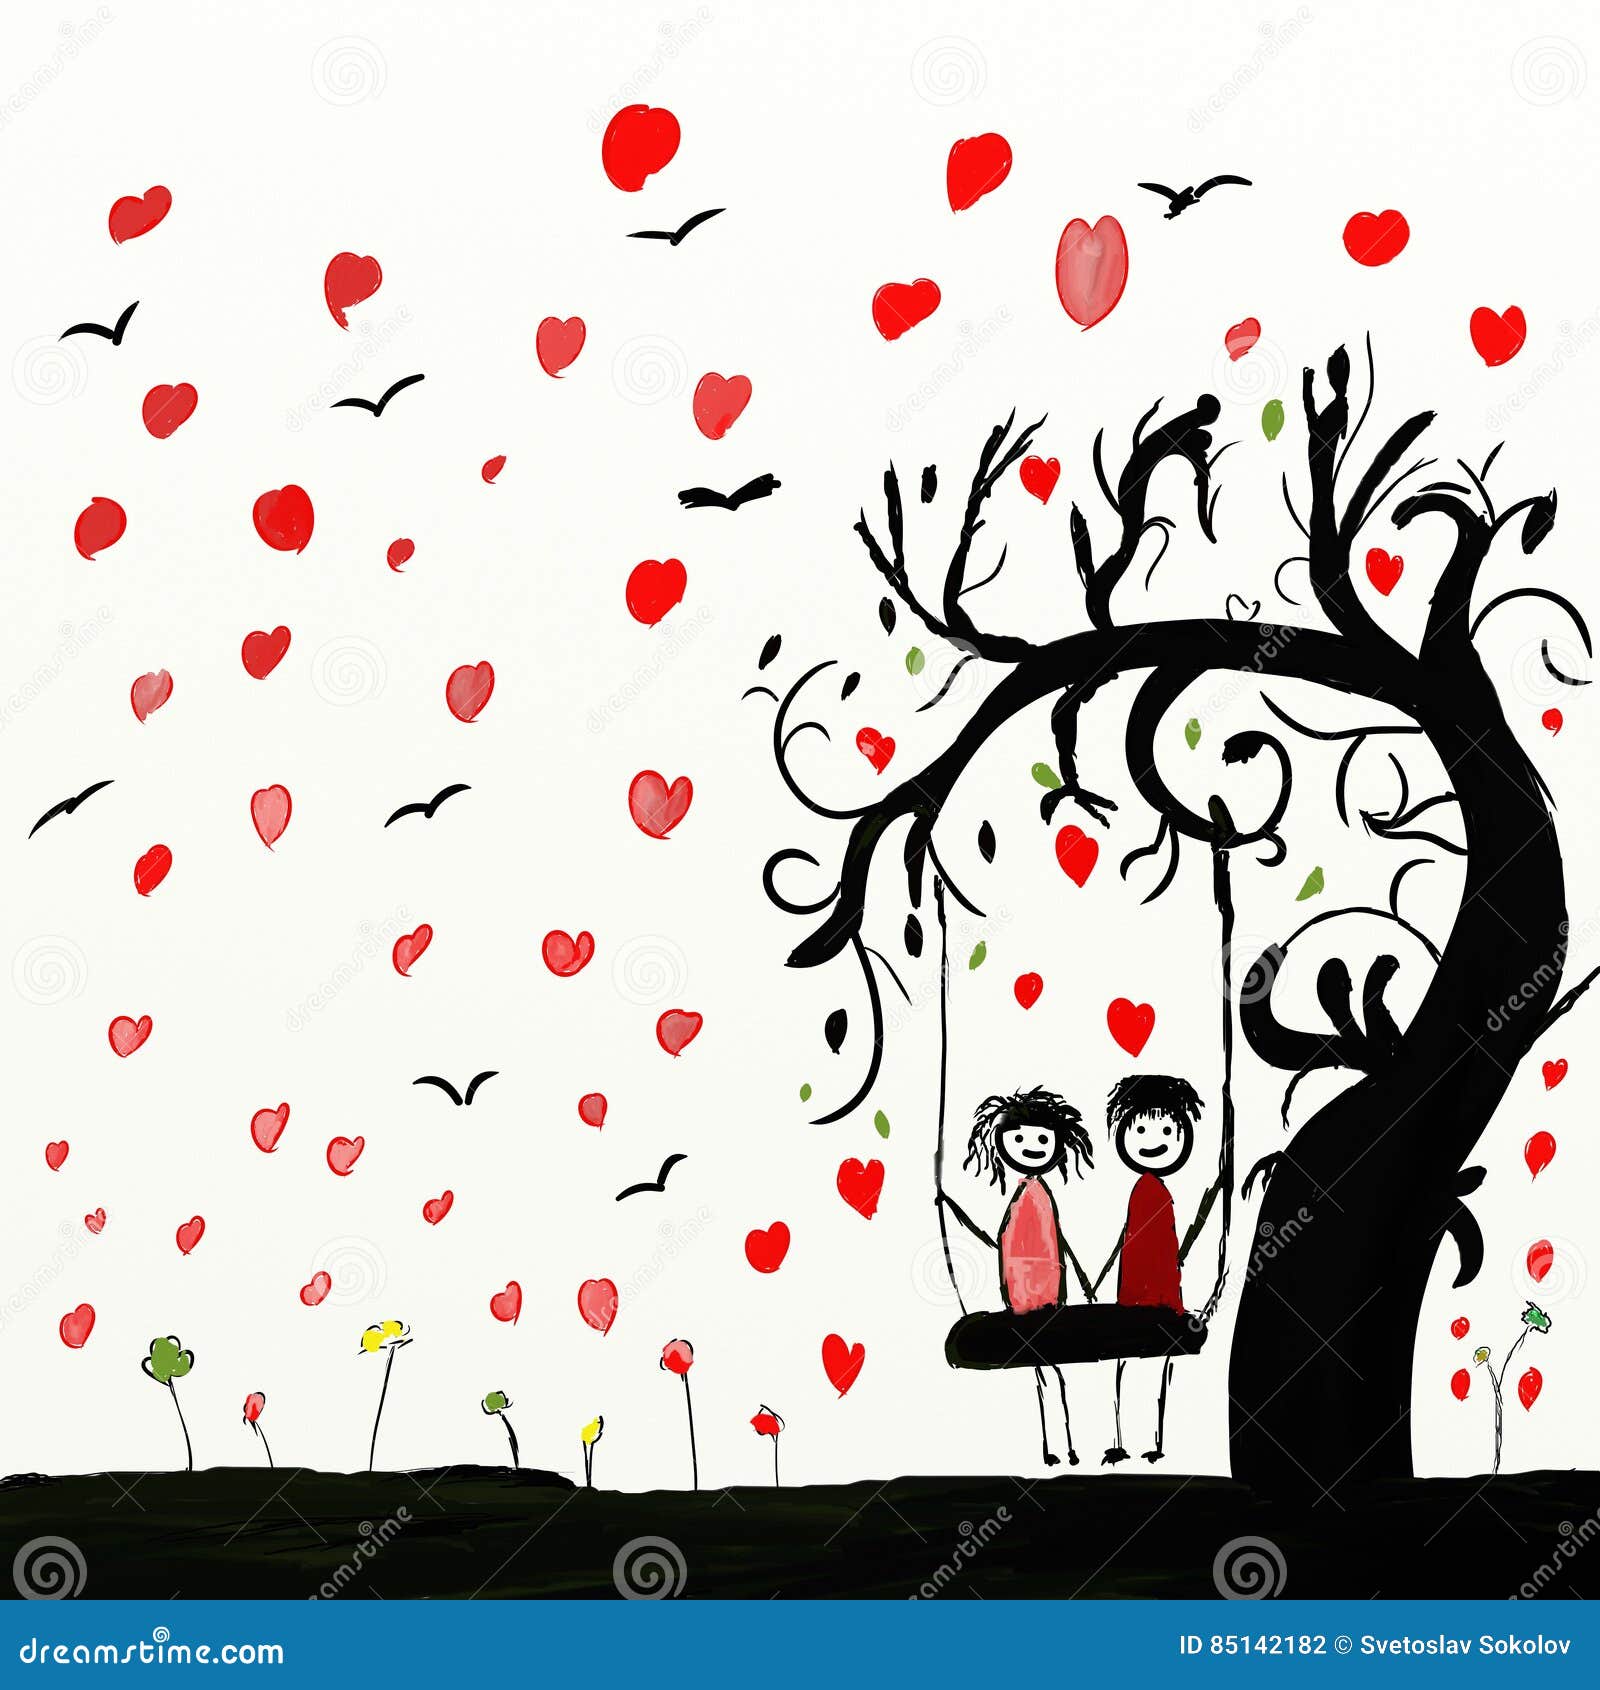 Cute Love Drawings Coloring Pages - Get Coloring Pages-saigonsouth.com.vn